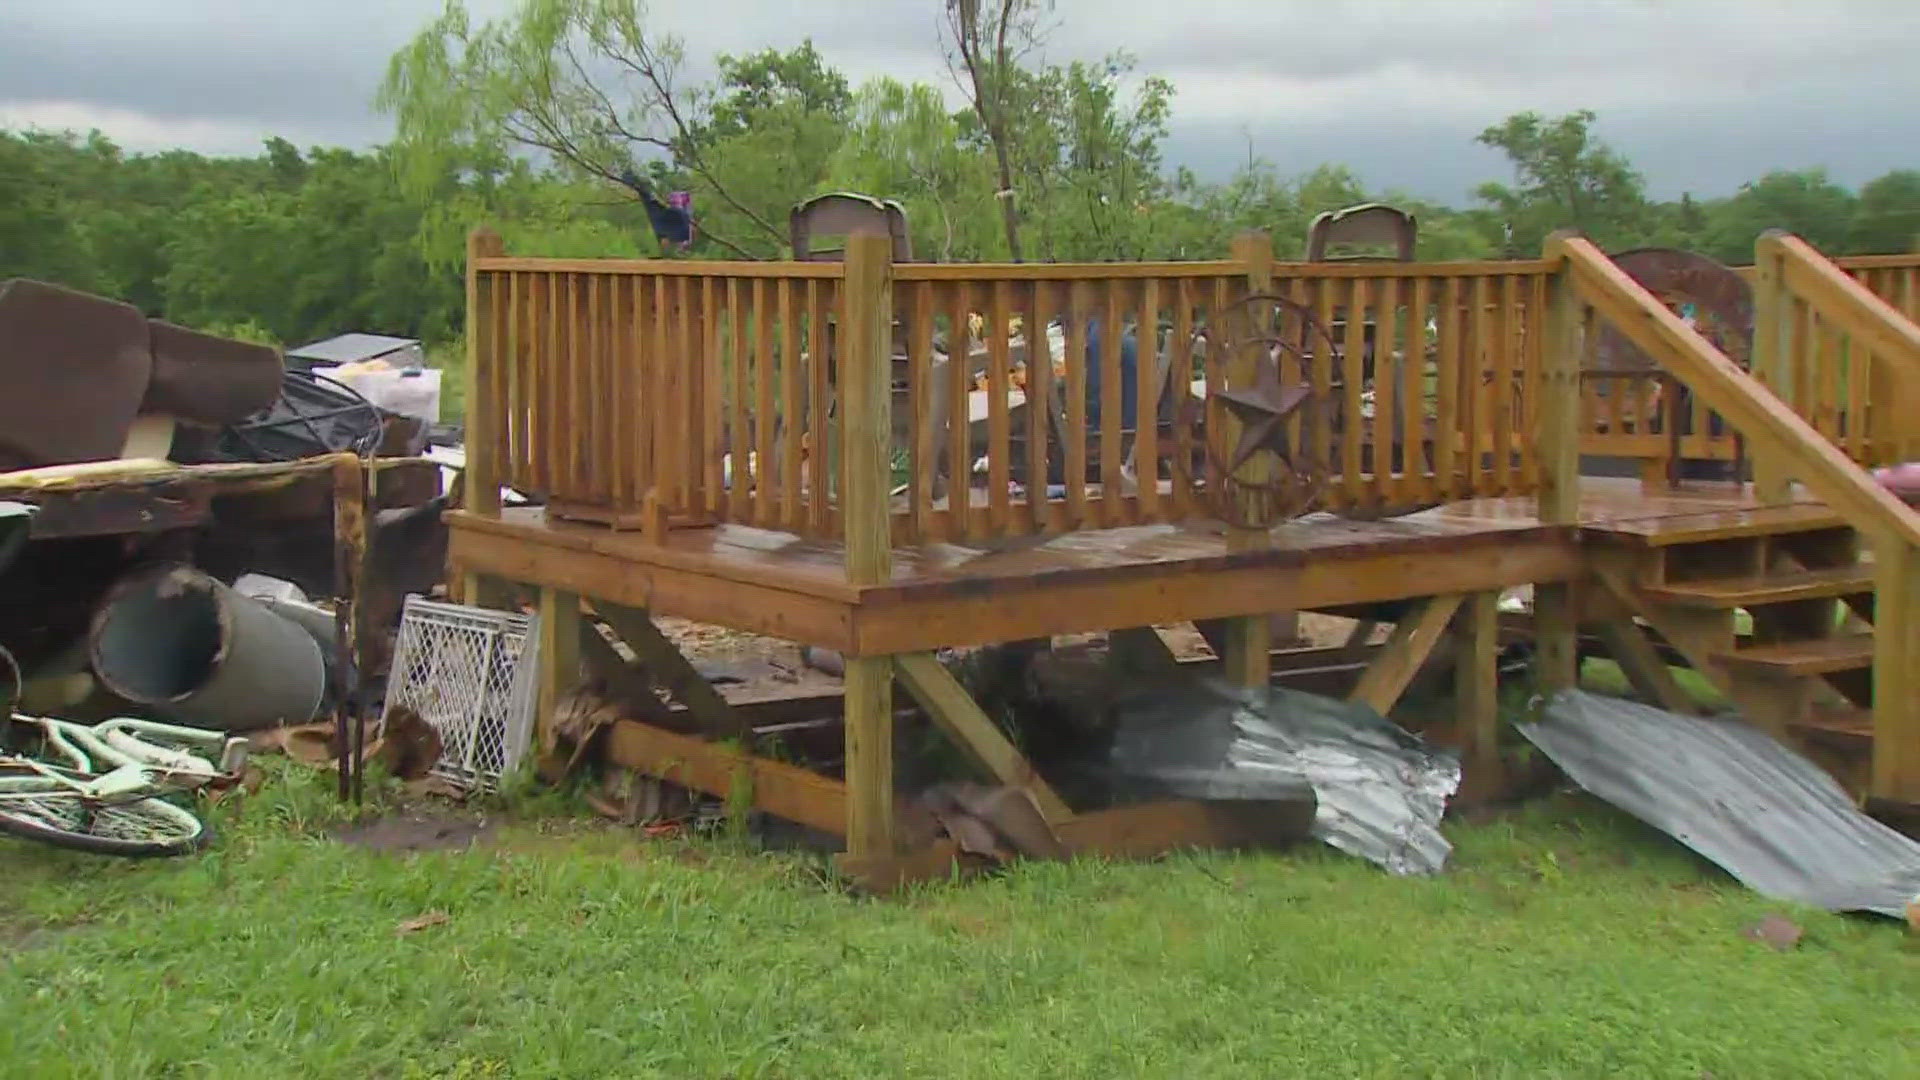 Damage was reported after storms moved through Navarro County, Texas Friday.